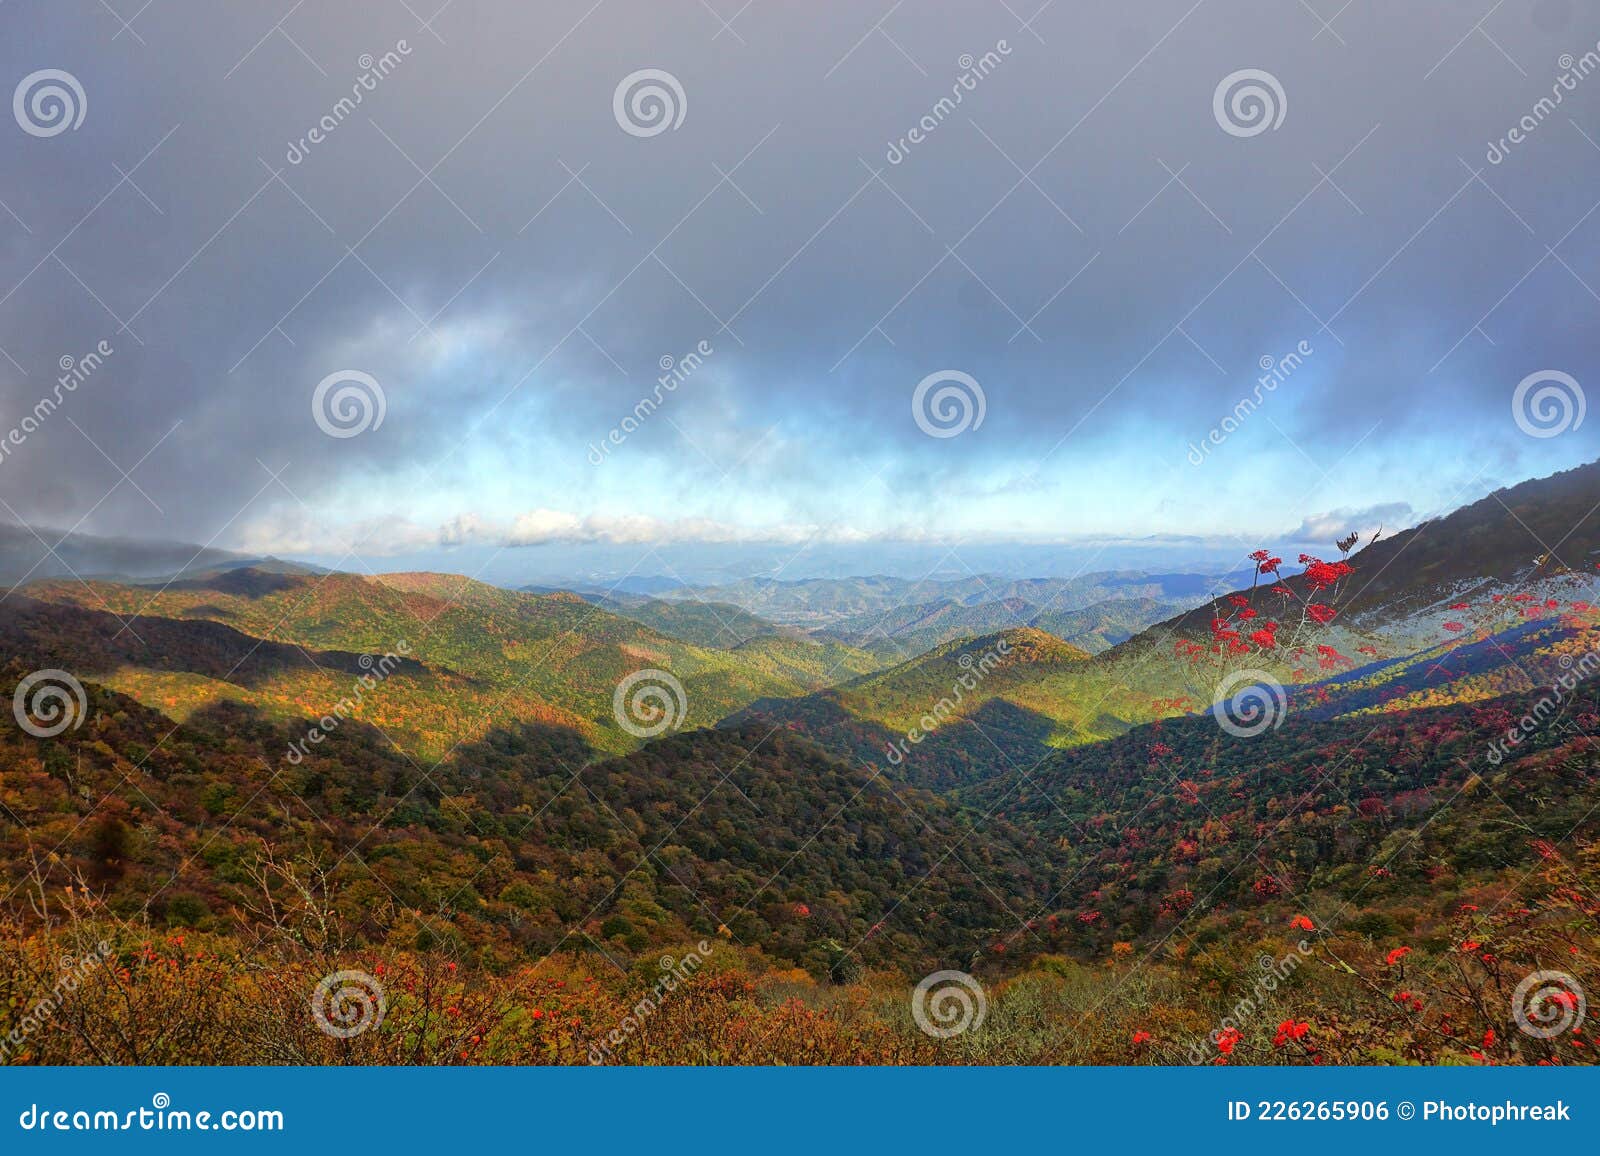 fall in the smoky mountians nc